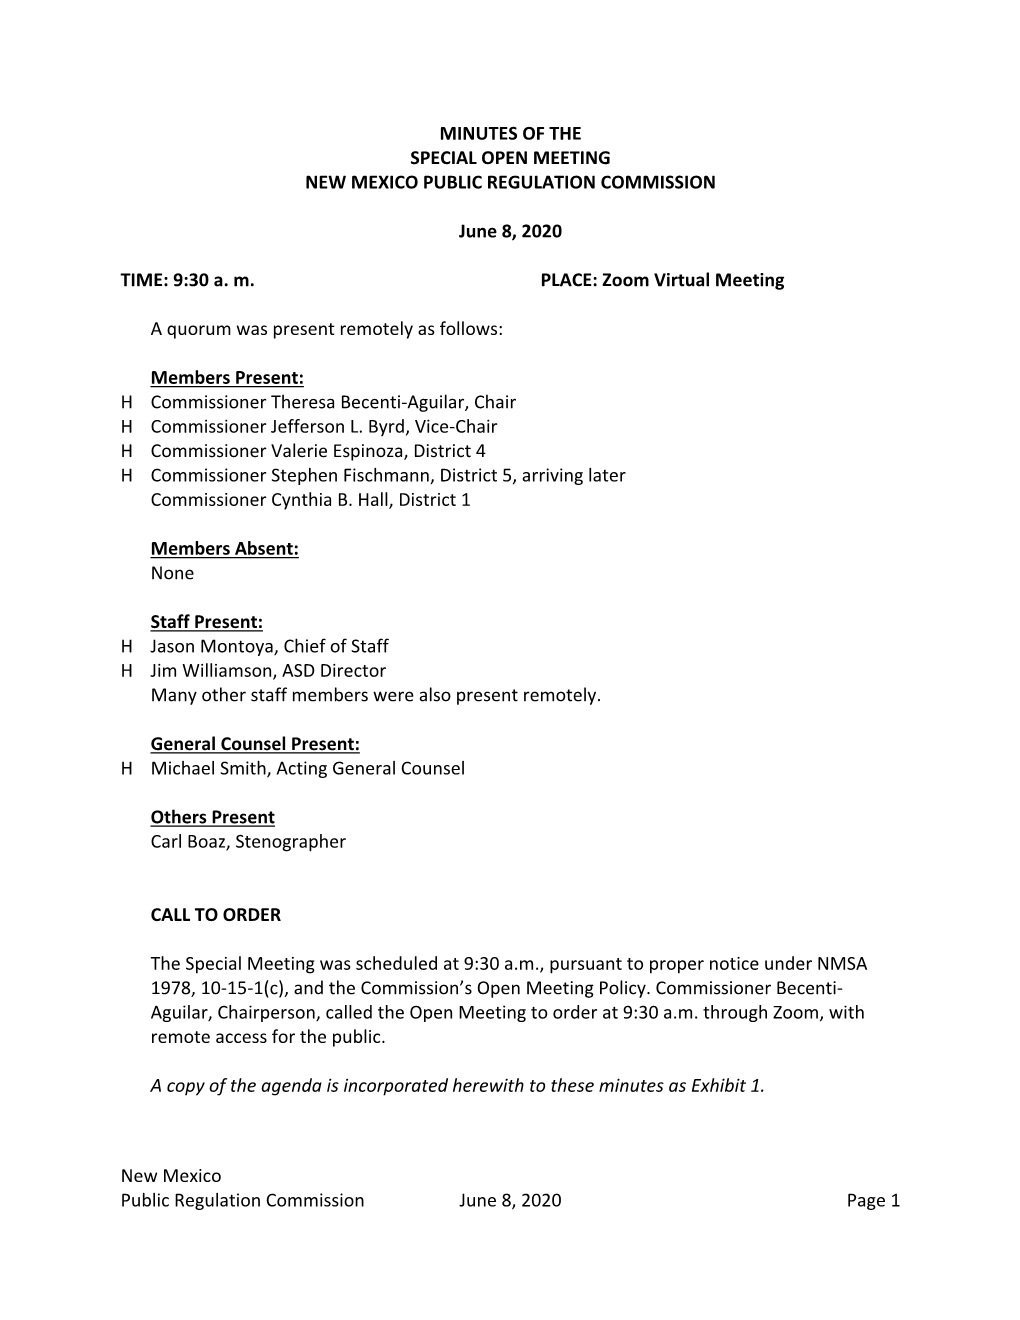 Minutes of the Special Open Meeting New Mexico Public Regulation Commission